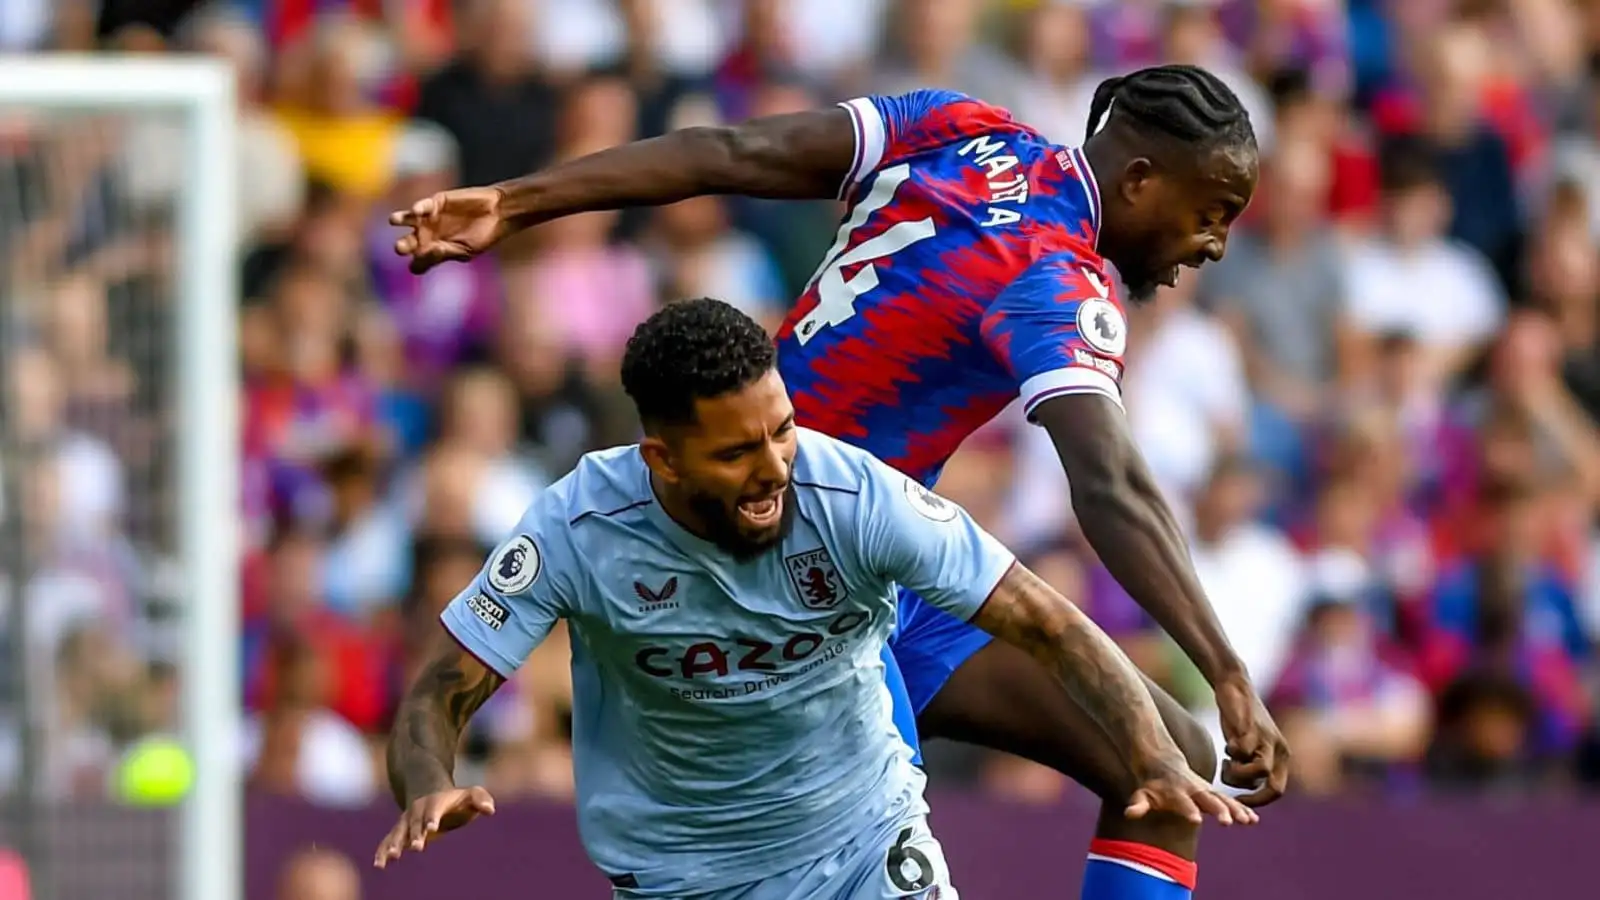 Douglas Luiz under pressure from Jean-Philippe Mateta of Crystal Palace FC takes the ball past Douglas Luiz of Aston Villa FC during the Premier League match between Crystal Palace and Aston Villa at Selhurst Park, London